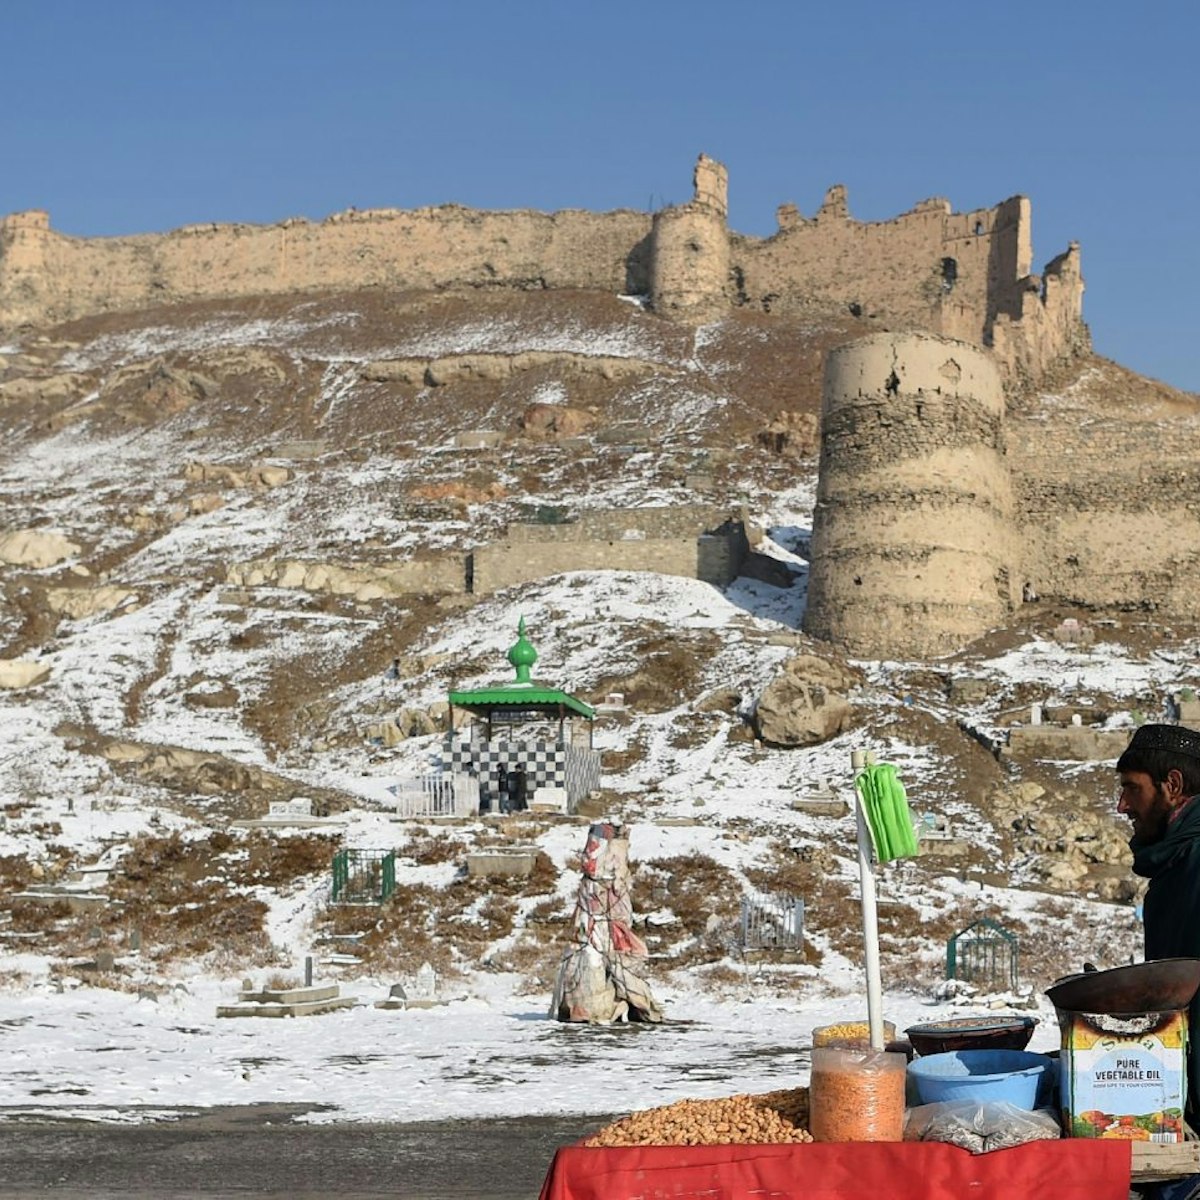 TOPSHOT - An Afghan vendor pushes a wheelbarrow after the first snowfall near the old fortress of Bala Hissar in Kabul on December 15, 2017. / AFP PHOTO / WAKIL KOHSAR        (Photo credit should read WAKIL KOHSAR/AFP via Getty Images)